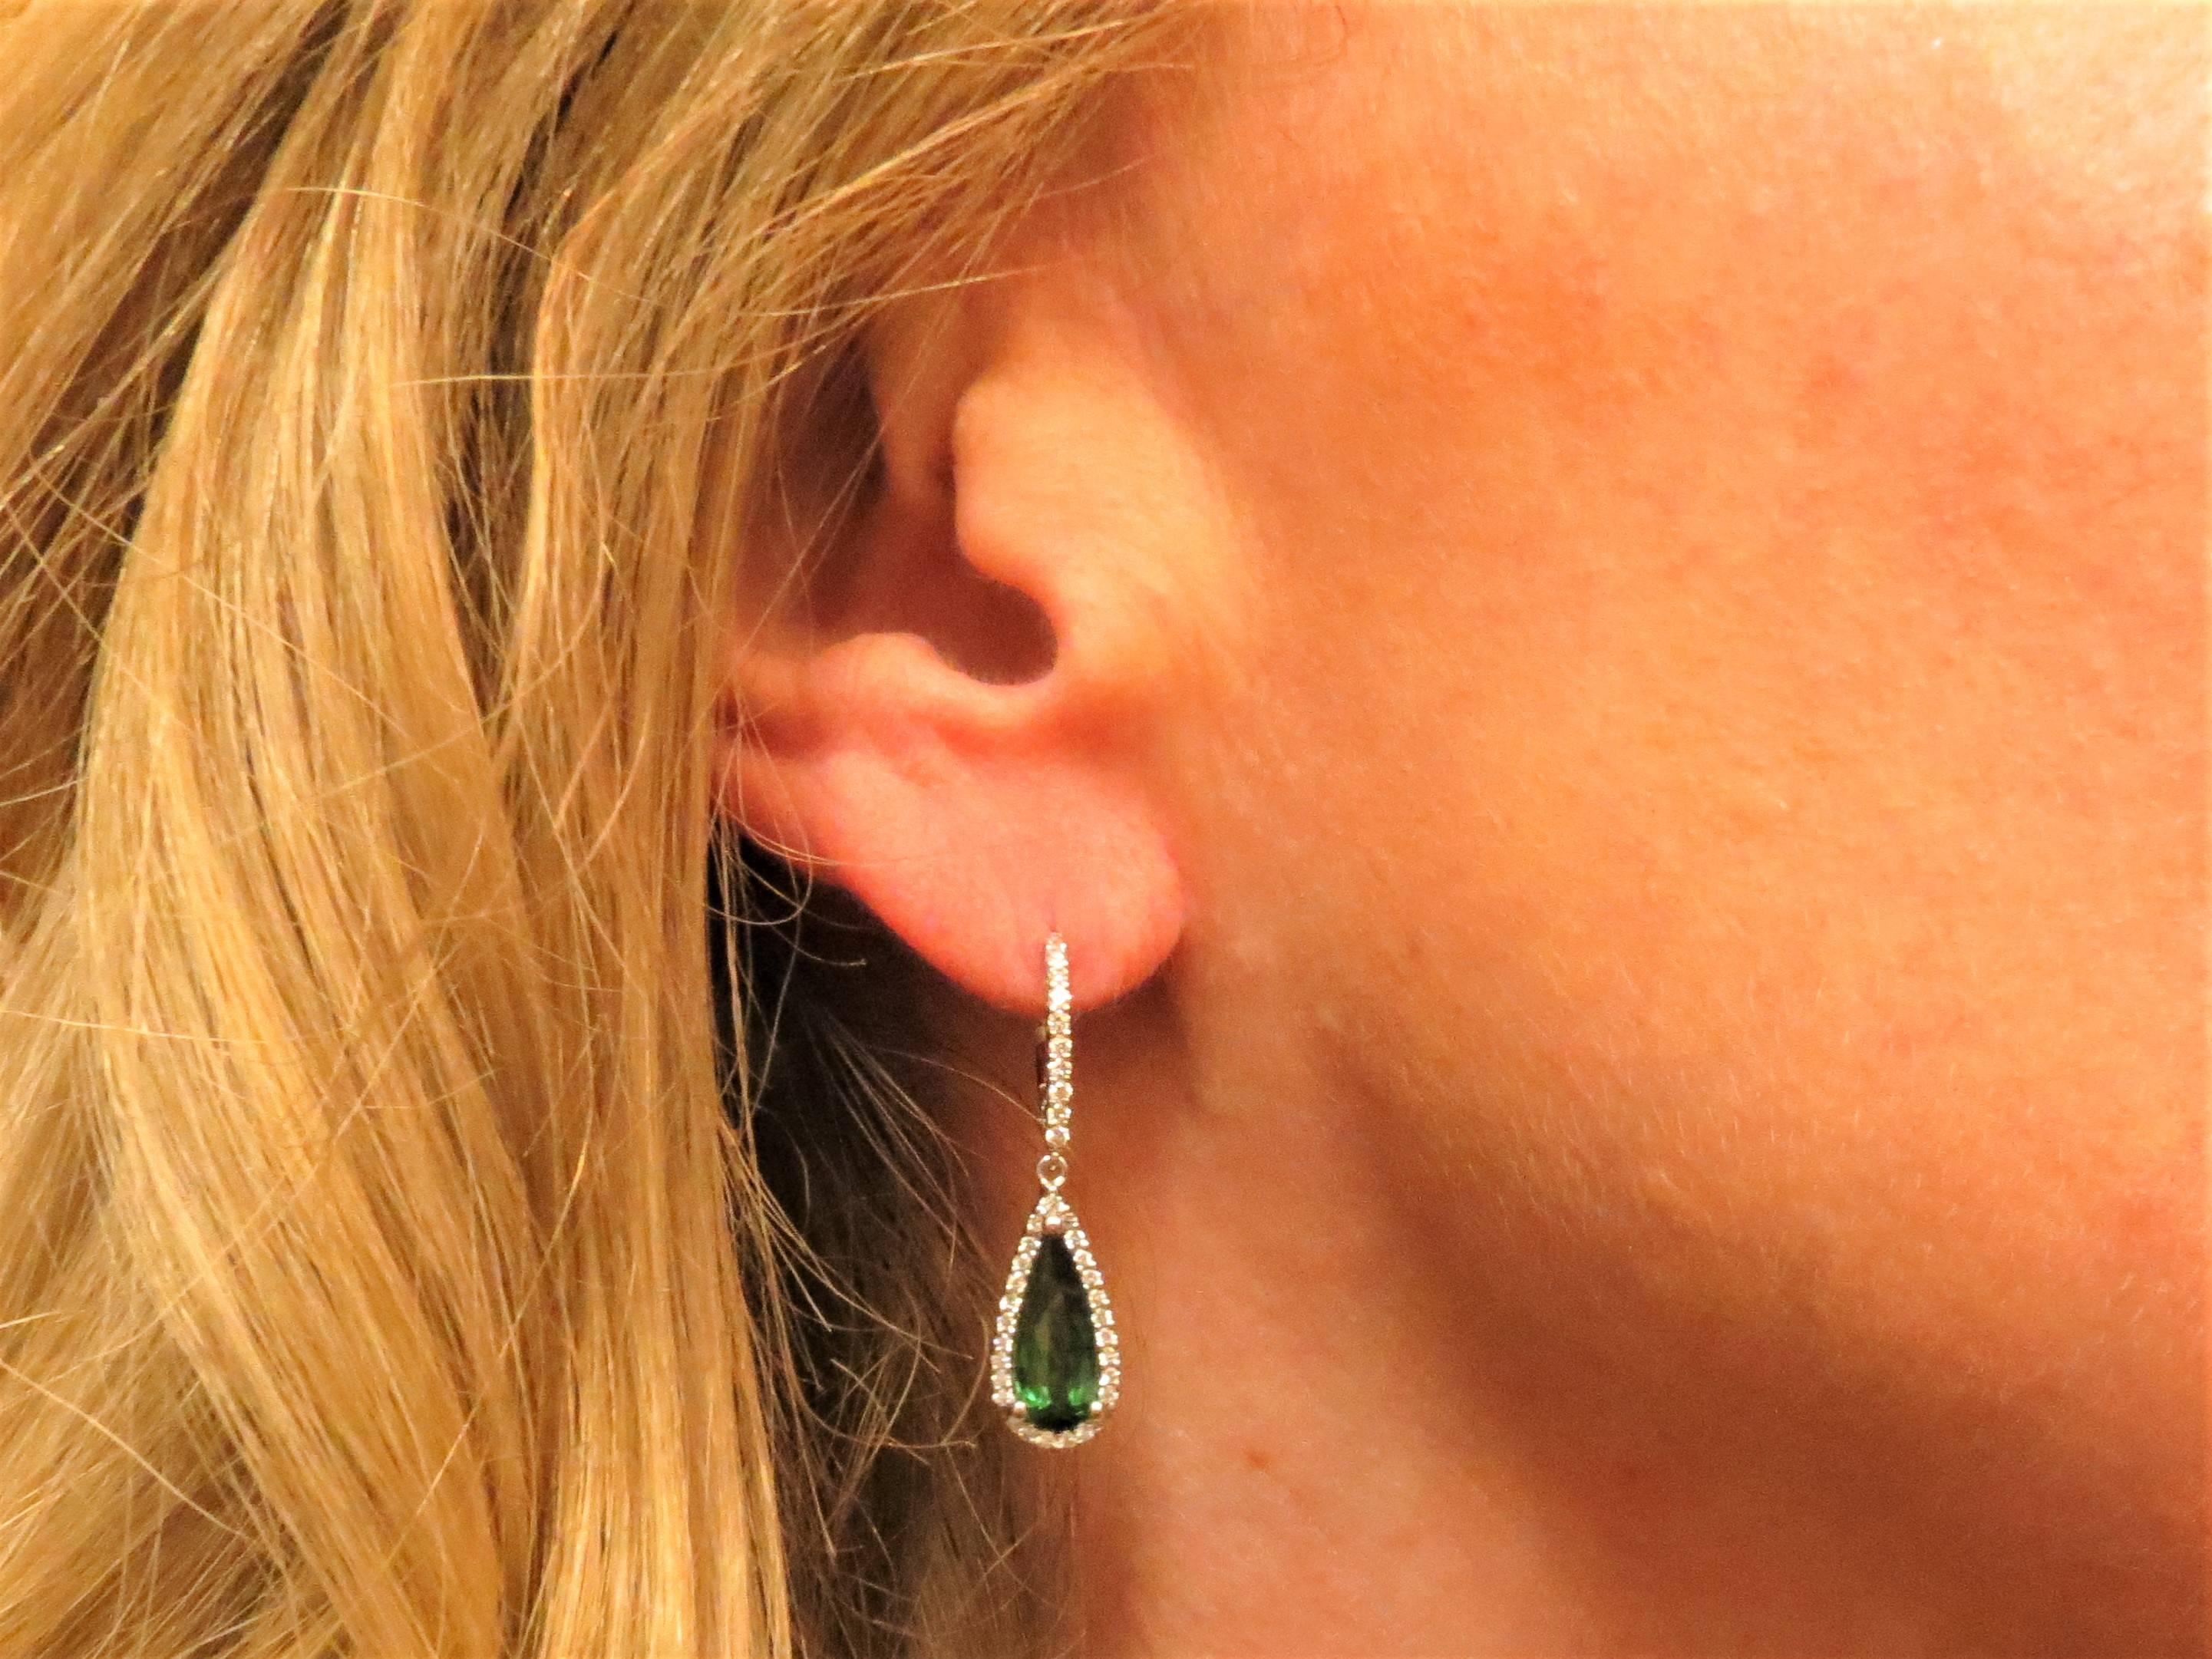 18K white gold drop earrings set with two pear shape green tourmalines surrounded by 76 full cut round diamonds weighing .50cts, G-H color, VS clarity